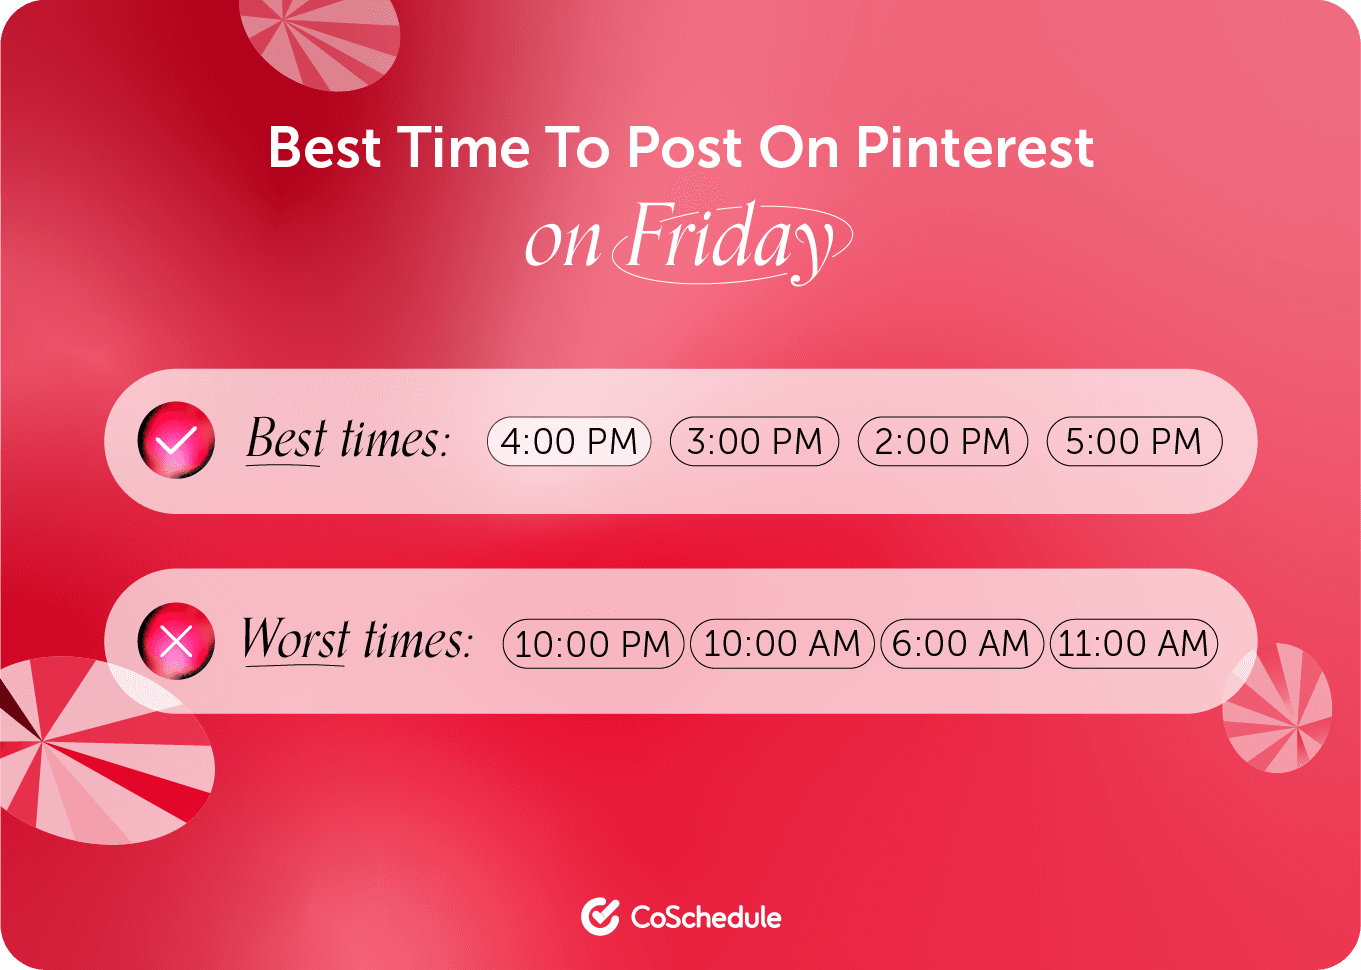 CoSchedule graphic on the best times to post on Pinterest Friday